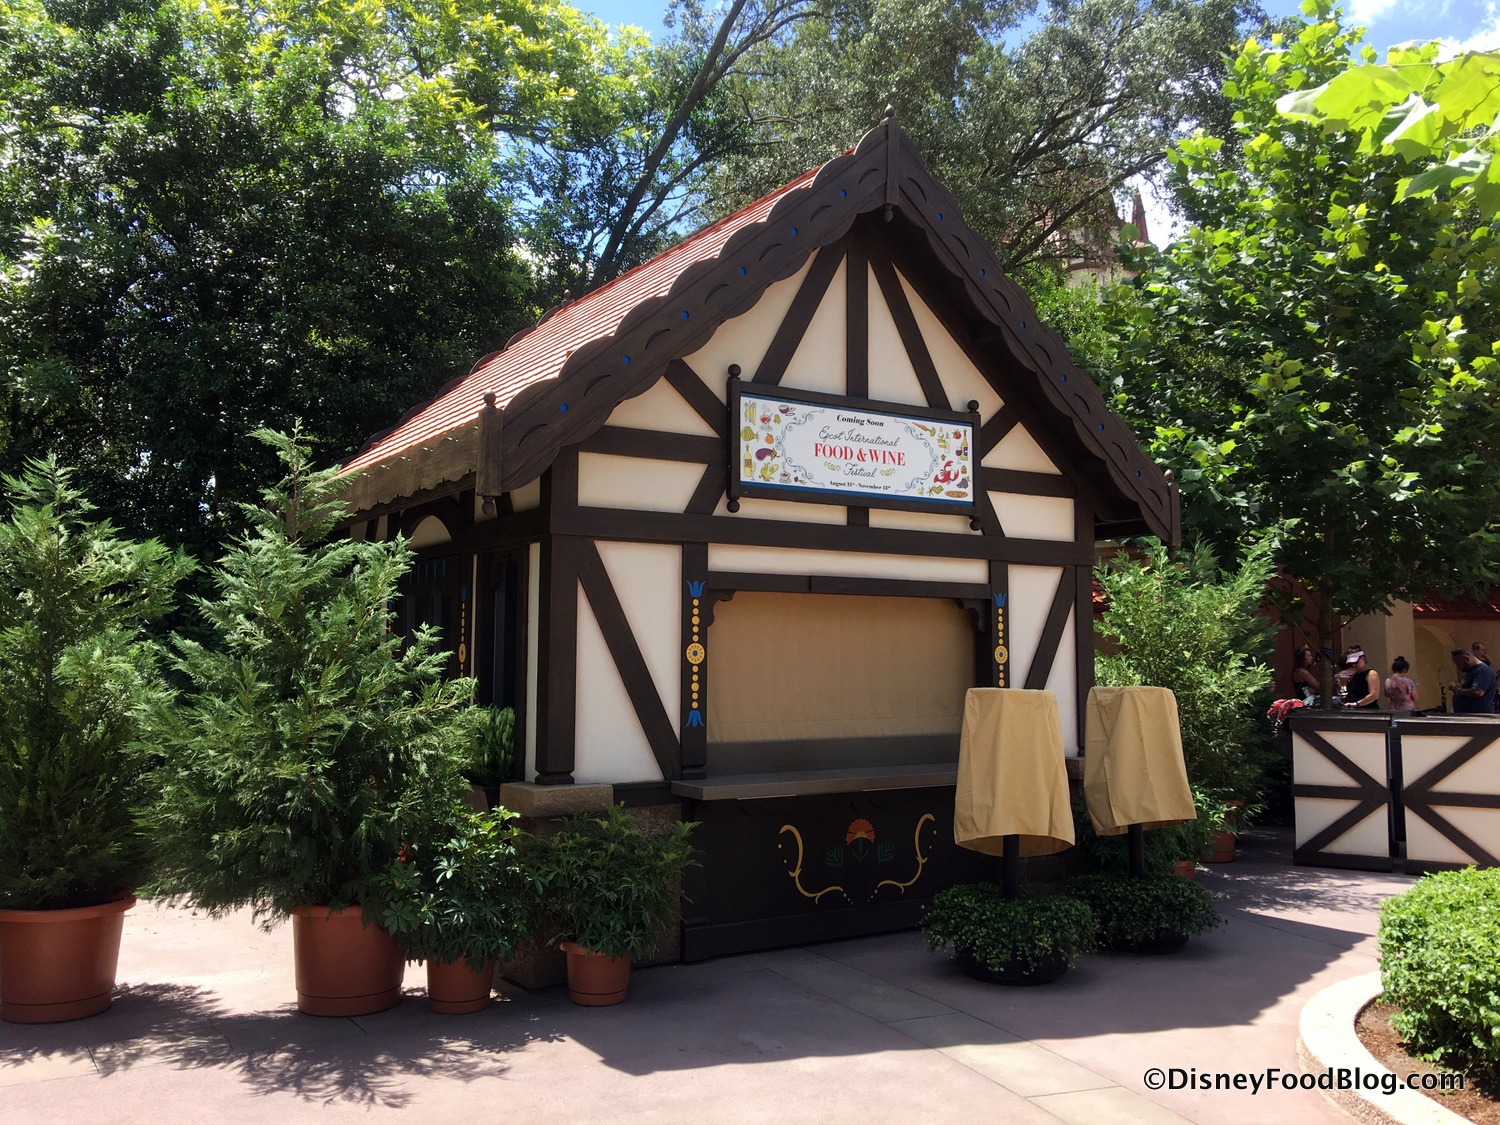 Sneak Peek: New Marketplace Booths Created for 2017 Epcot Food and Wine